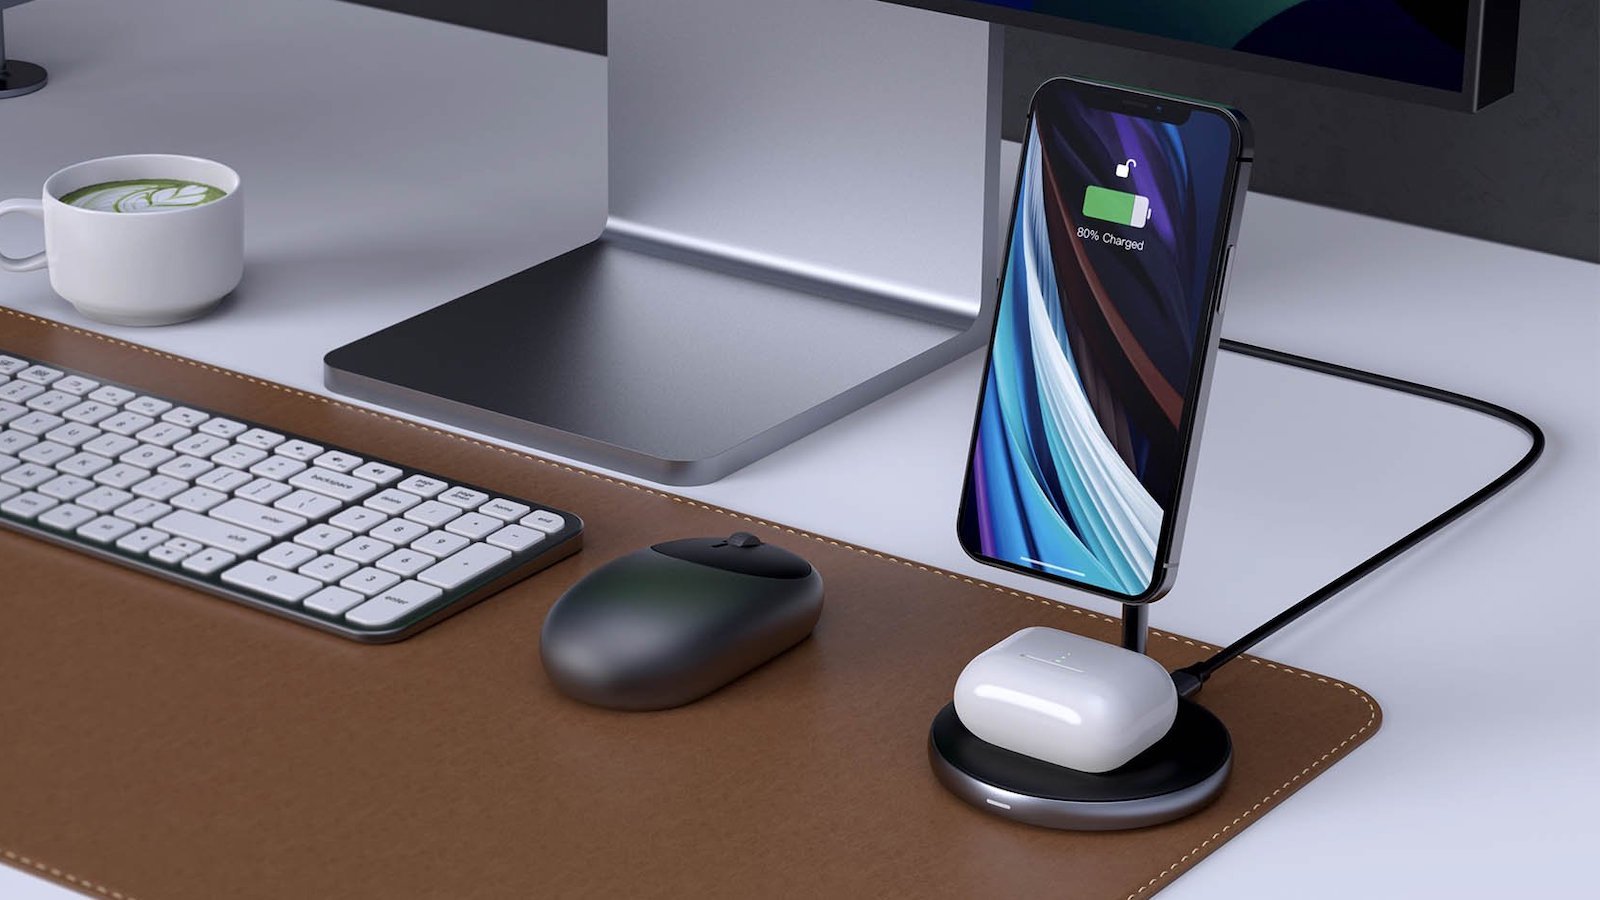 HYPER HyperJuice Magnetic Wireless Charging Stand powers your iPhone 12 and AirPods